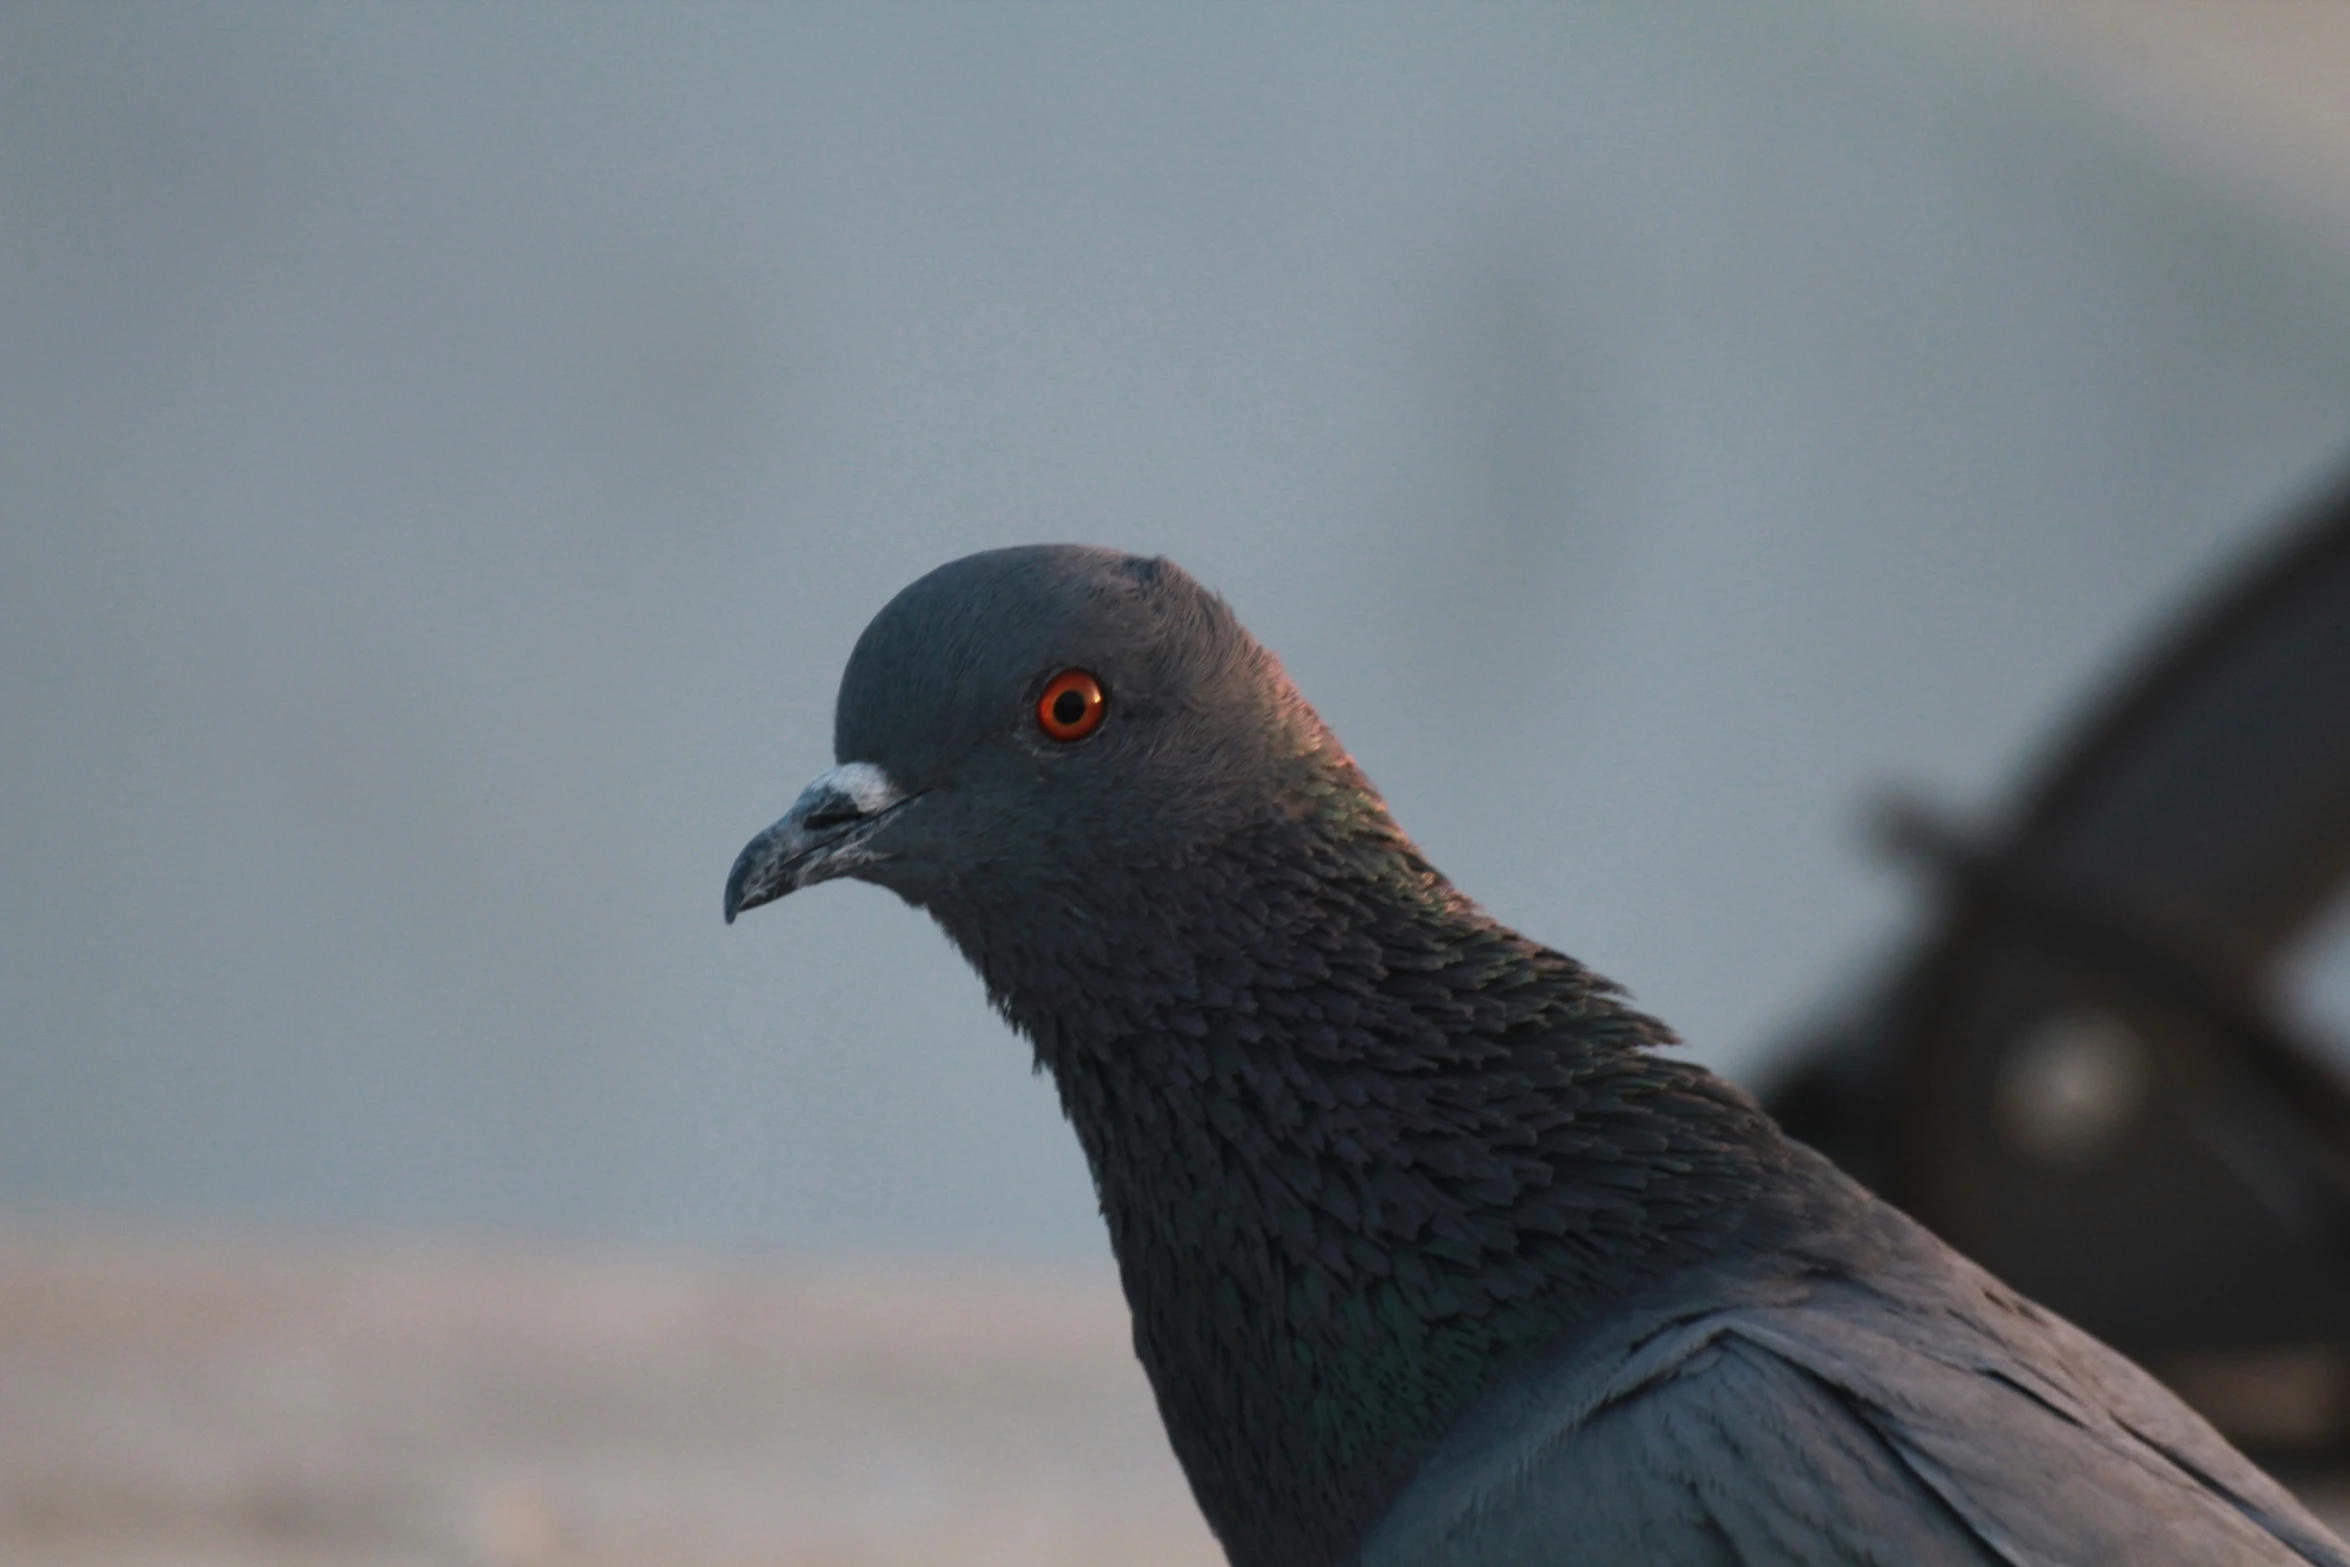 this is a close up view of a grey bird